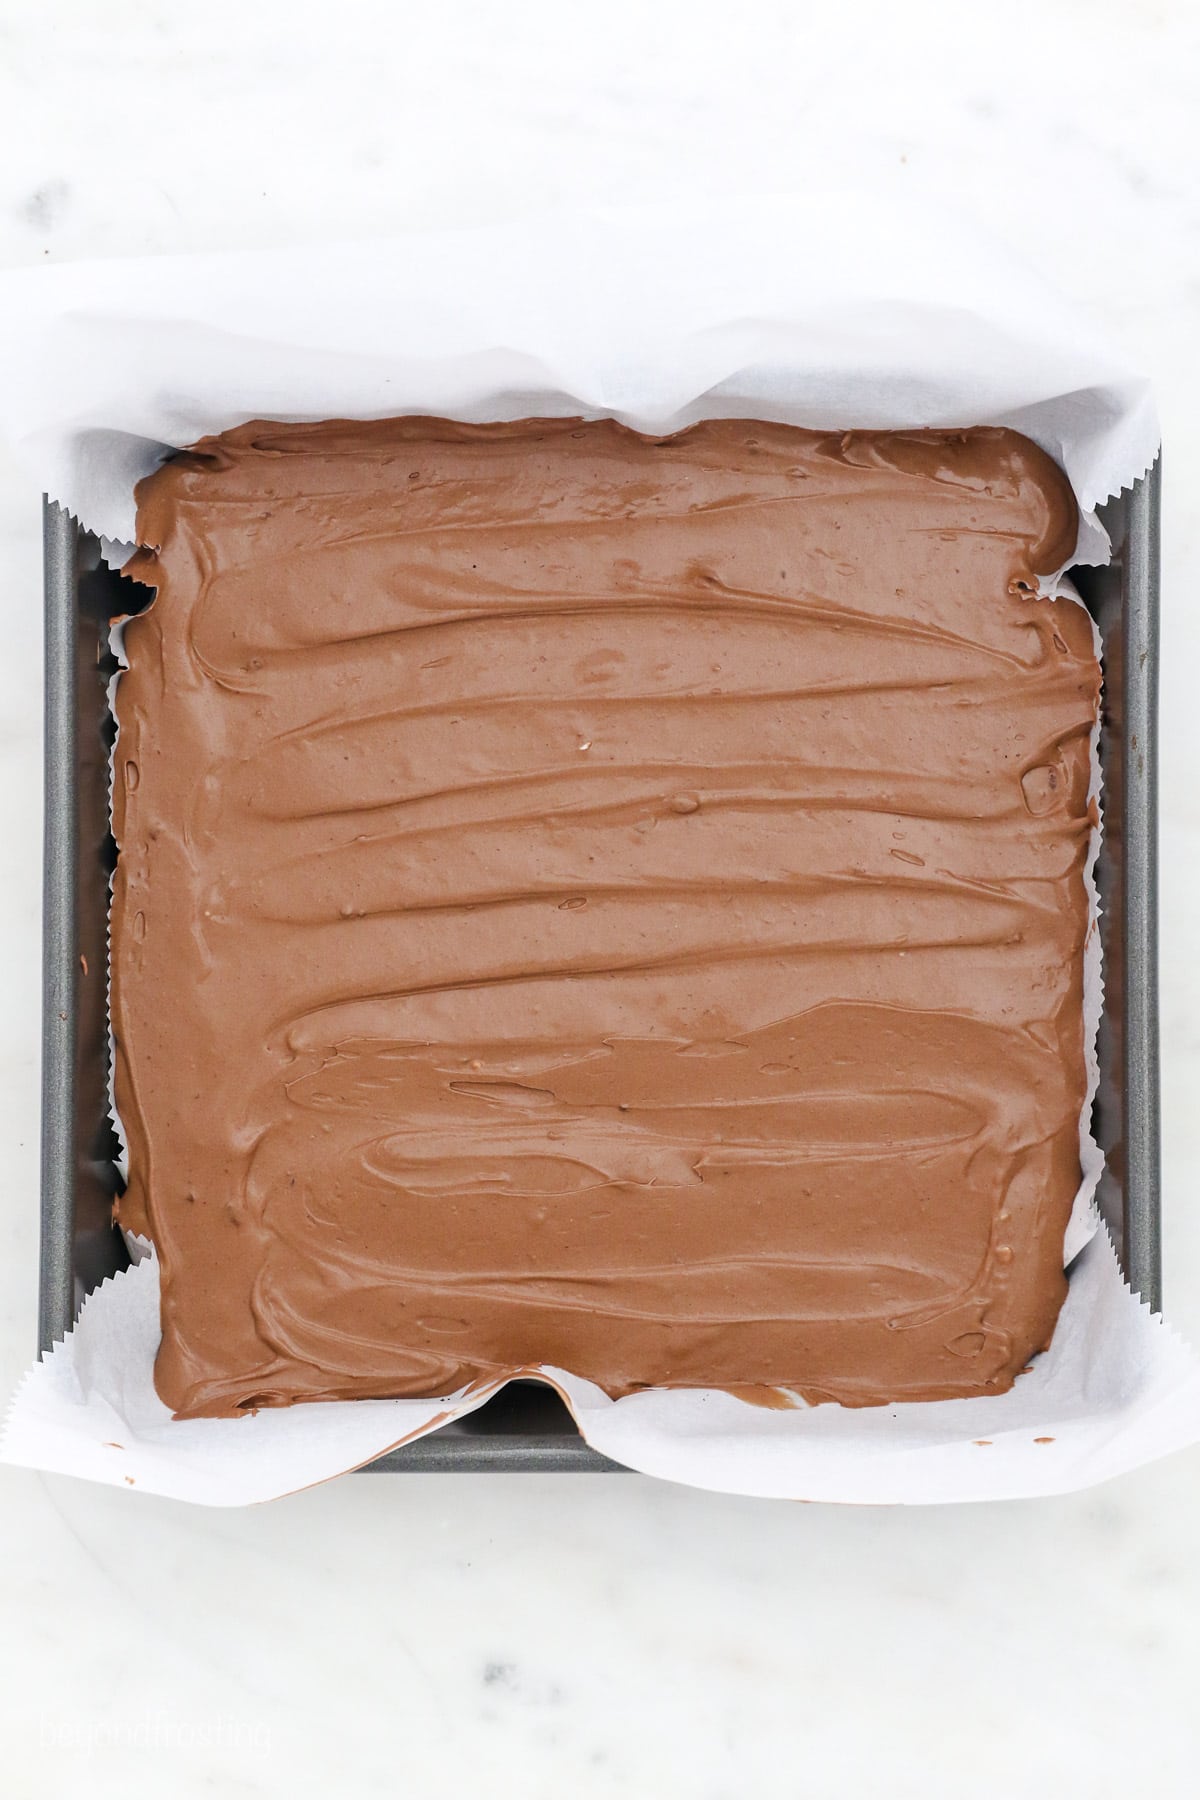 Unbaked chocolate cheesecake inside a square baking pan lined with parchment paper.